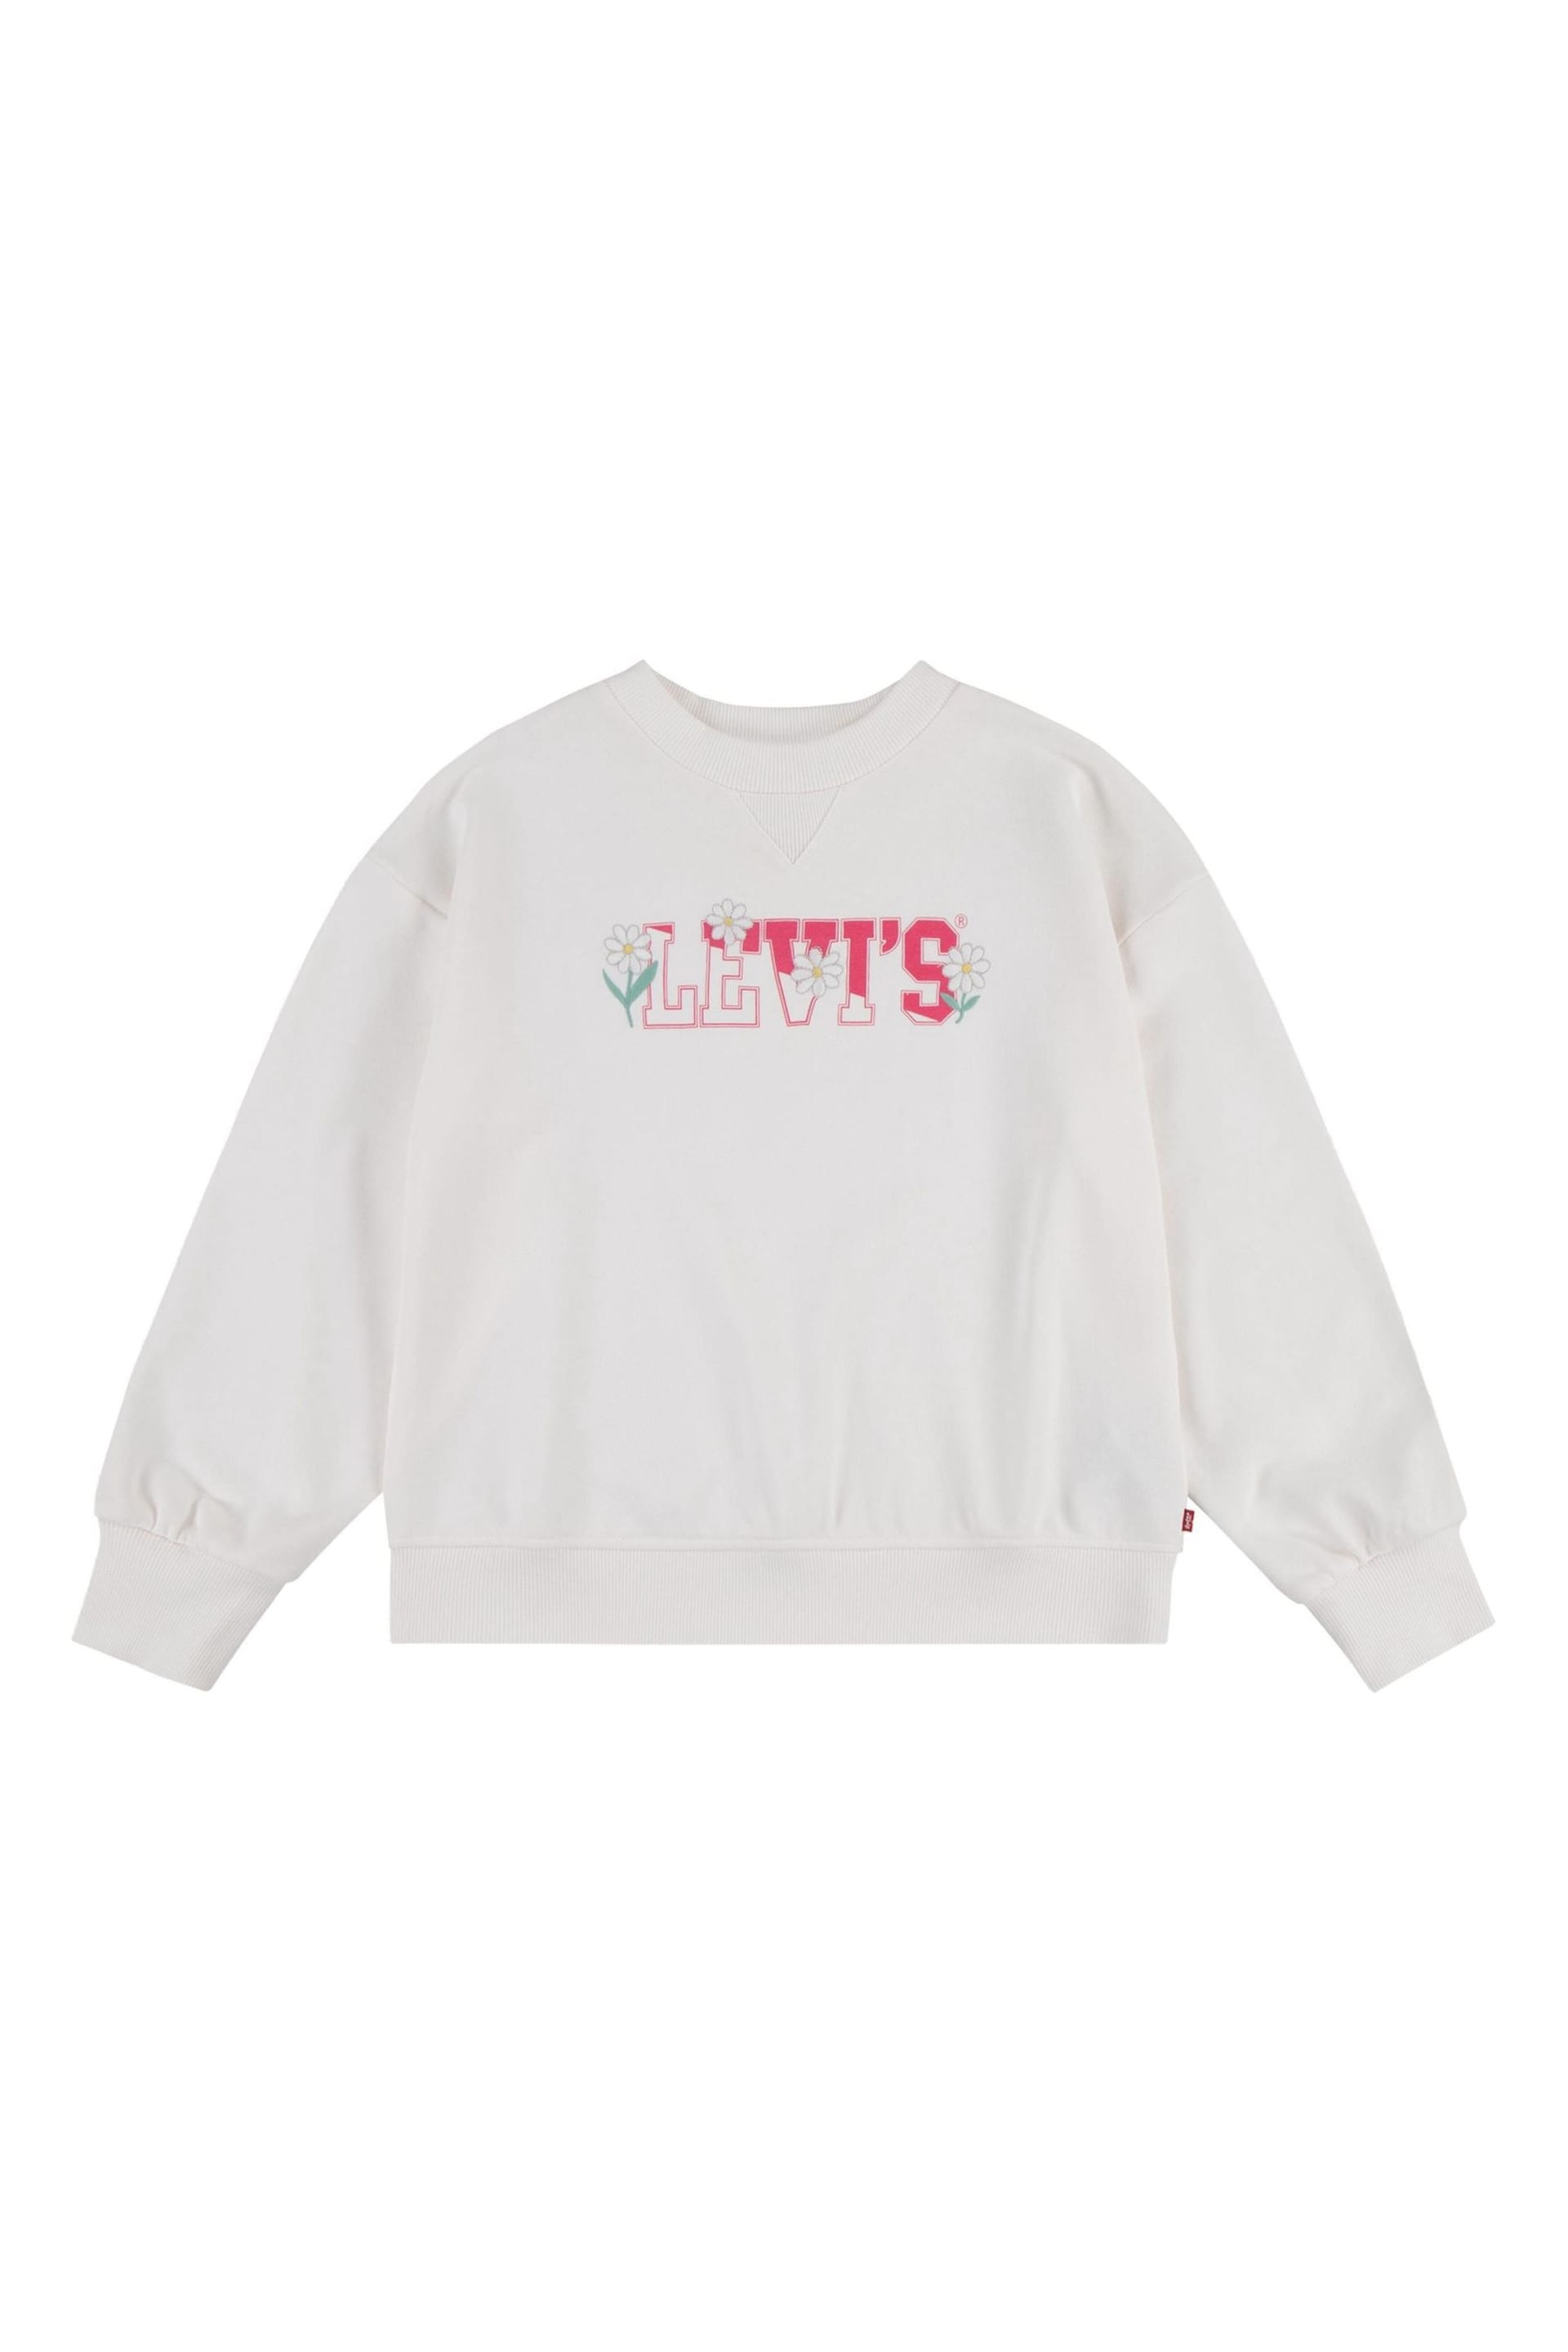 Levi's® White Floral Logo Crew Neck Sweater Jumper - Image 4 of 7